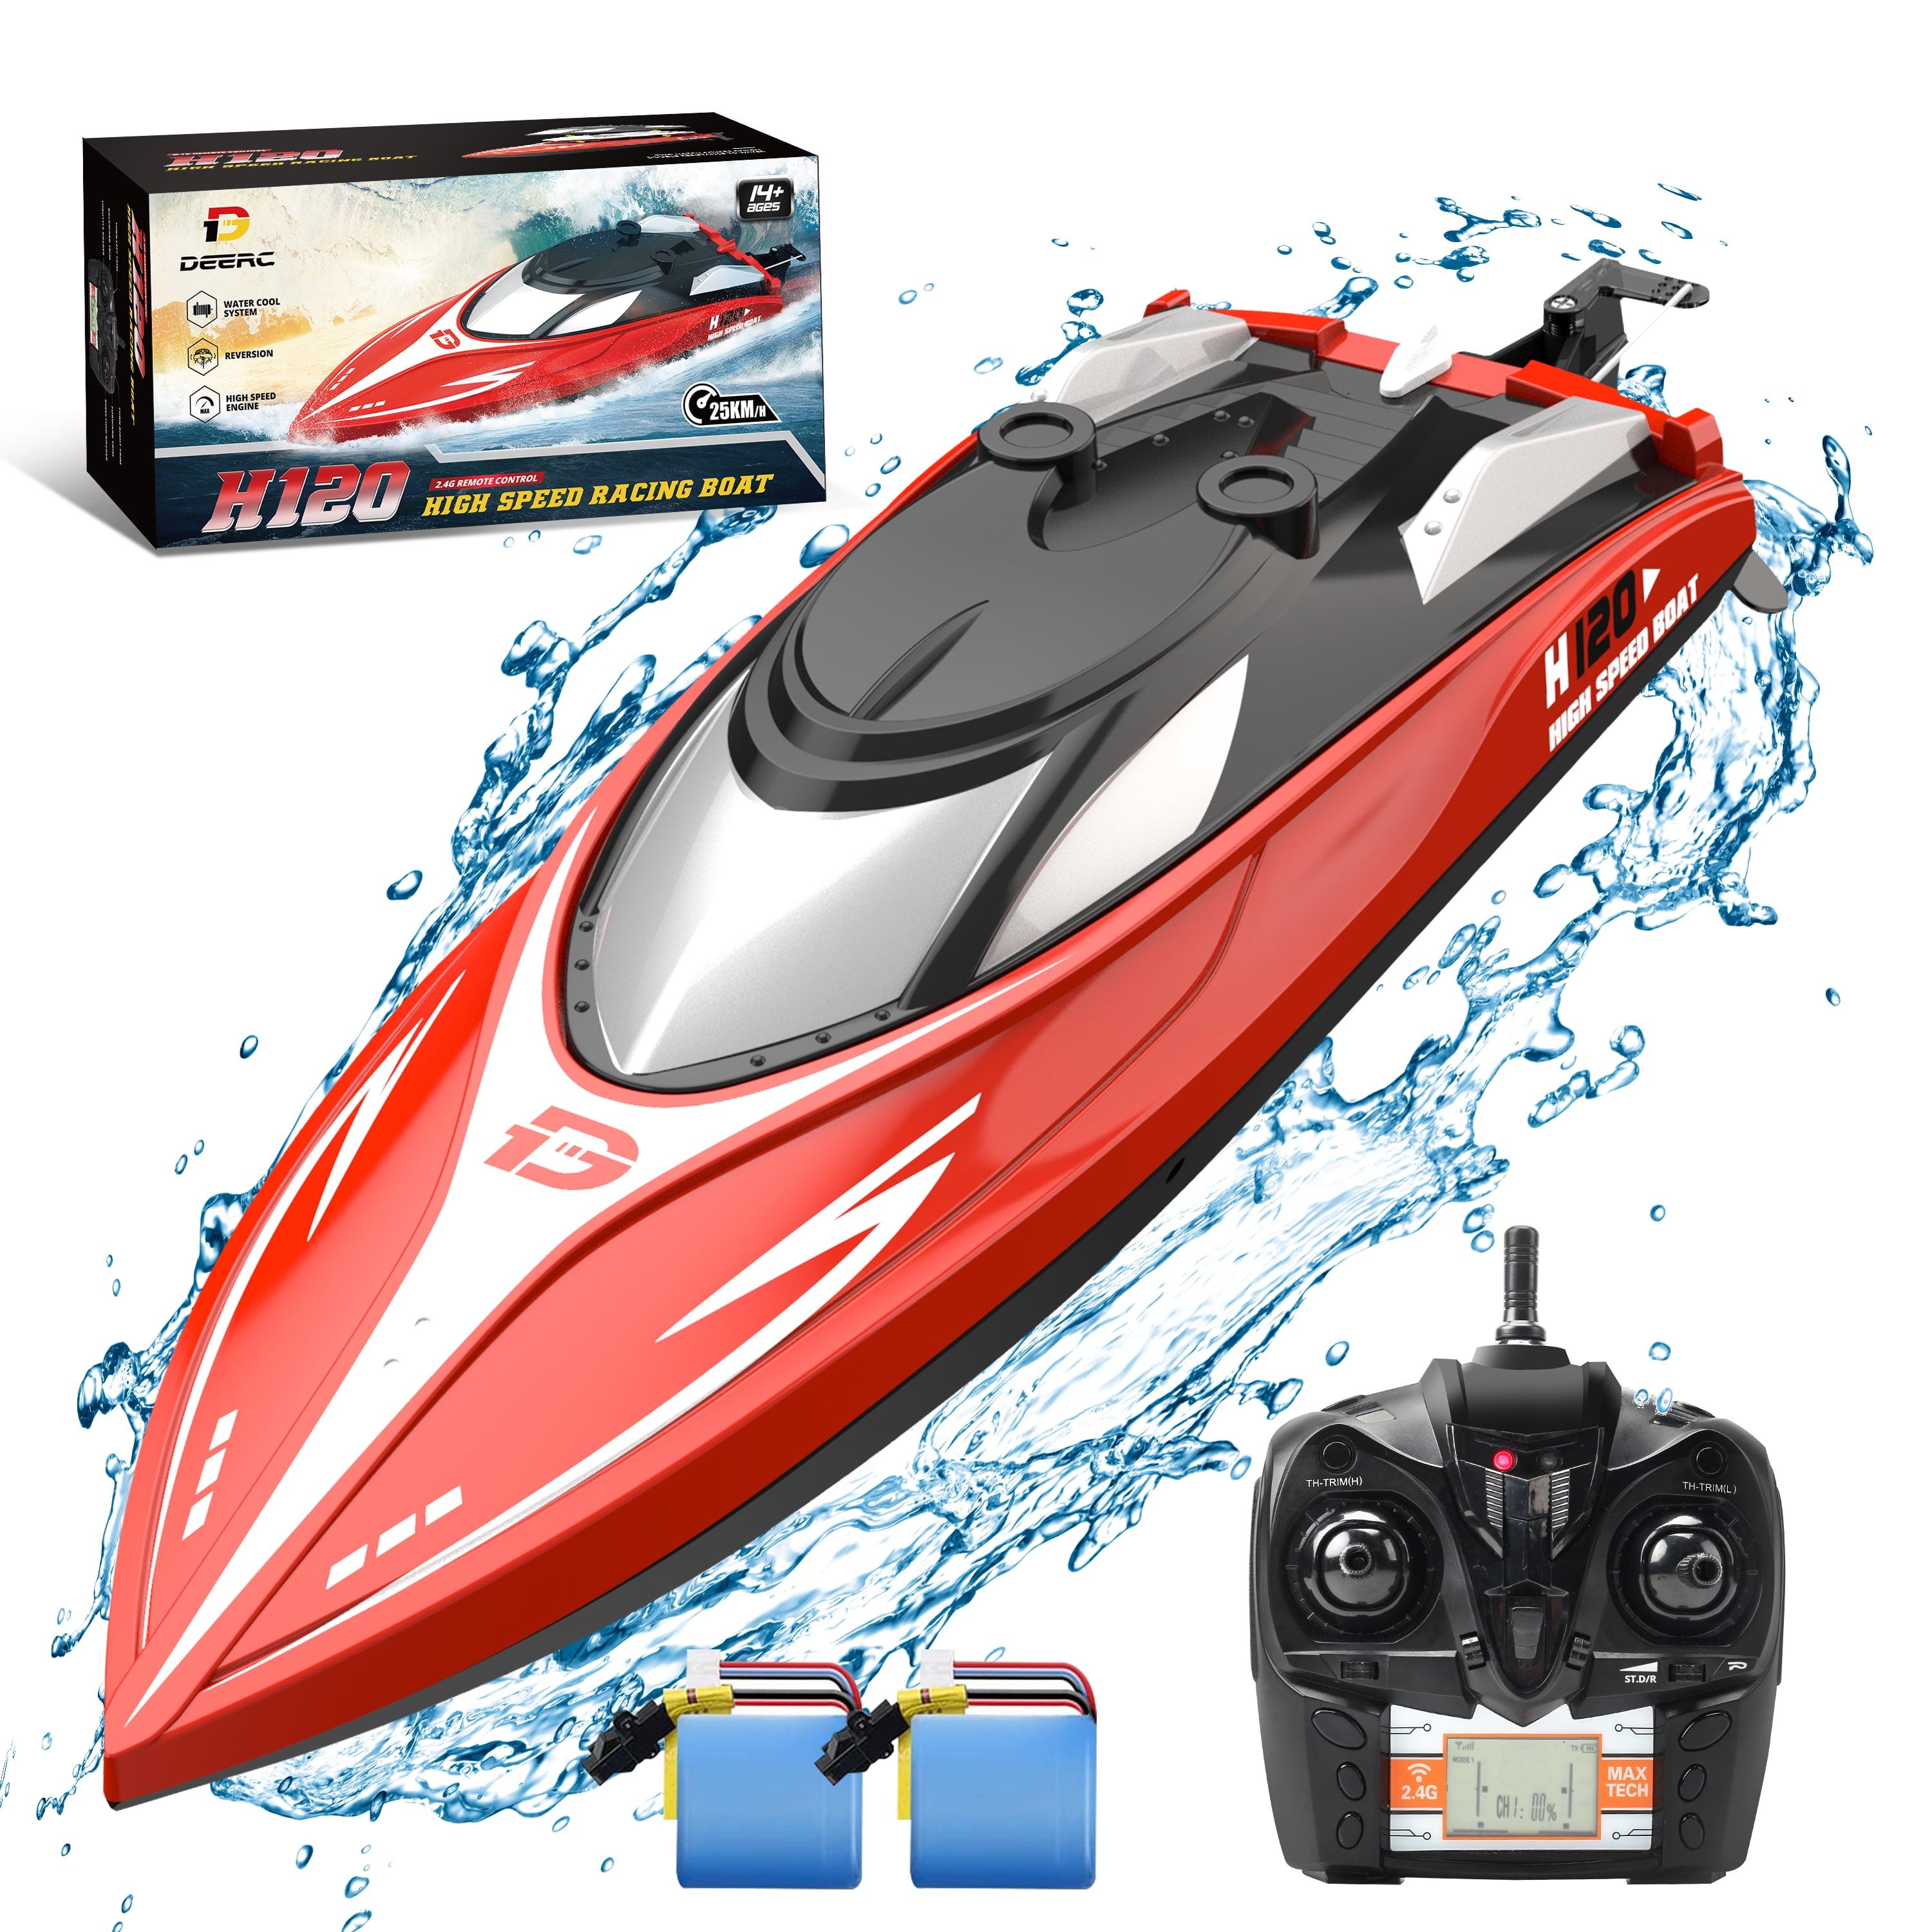 Rc Boats That Go 40 Mph: Different Power Options for 40 mph RC Boats